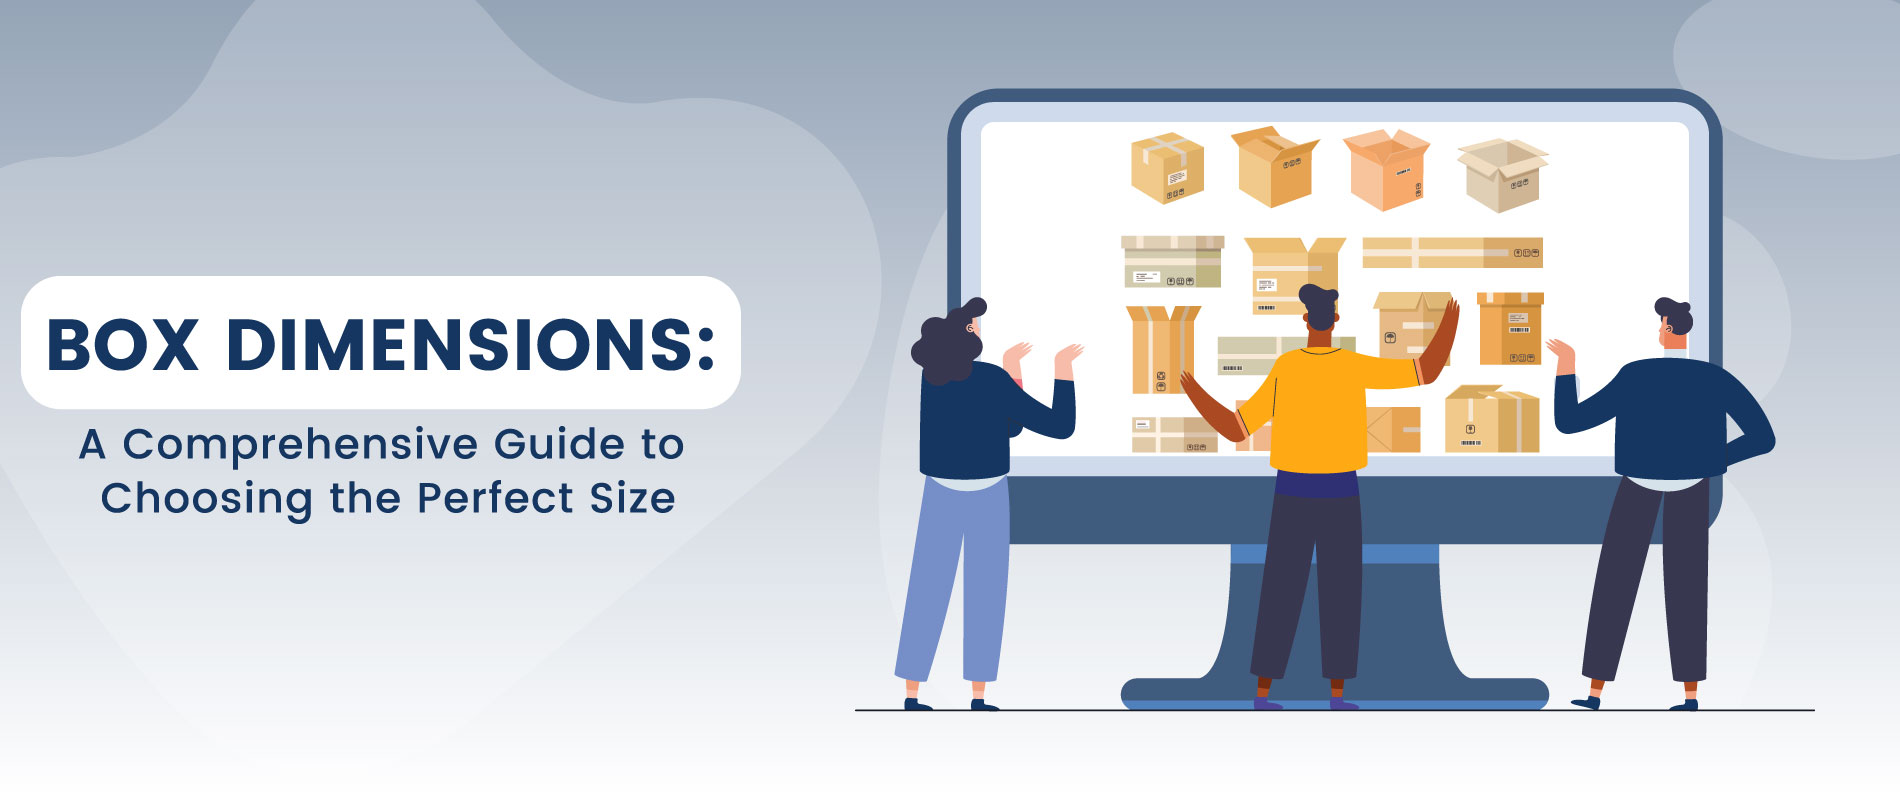 Box Dimensions: A Comprehensive Guide to Choosing the Perfect Size